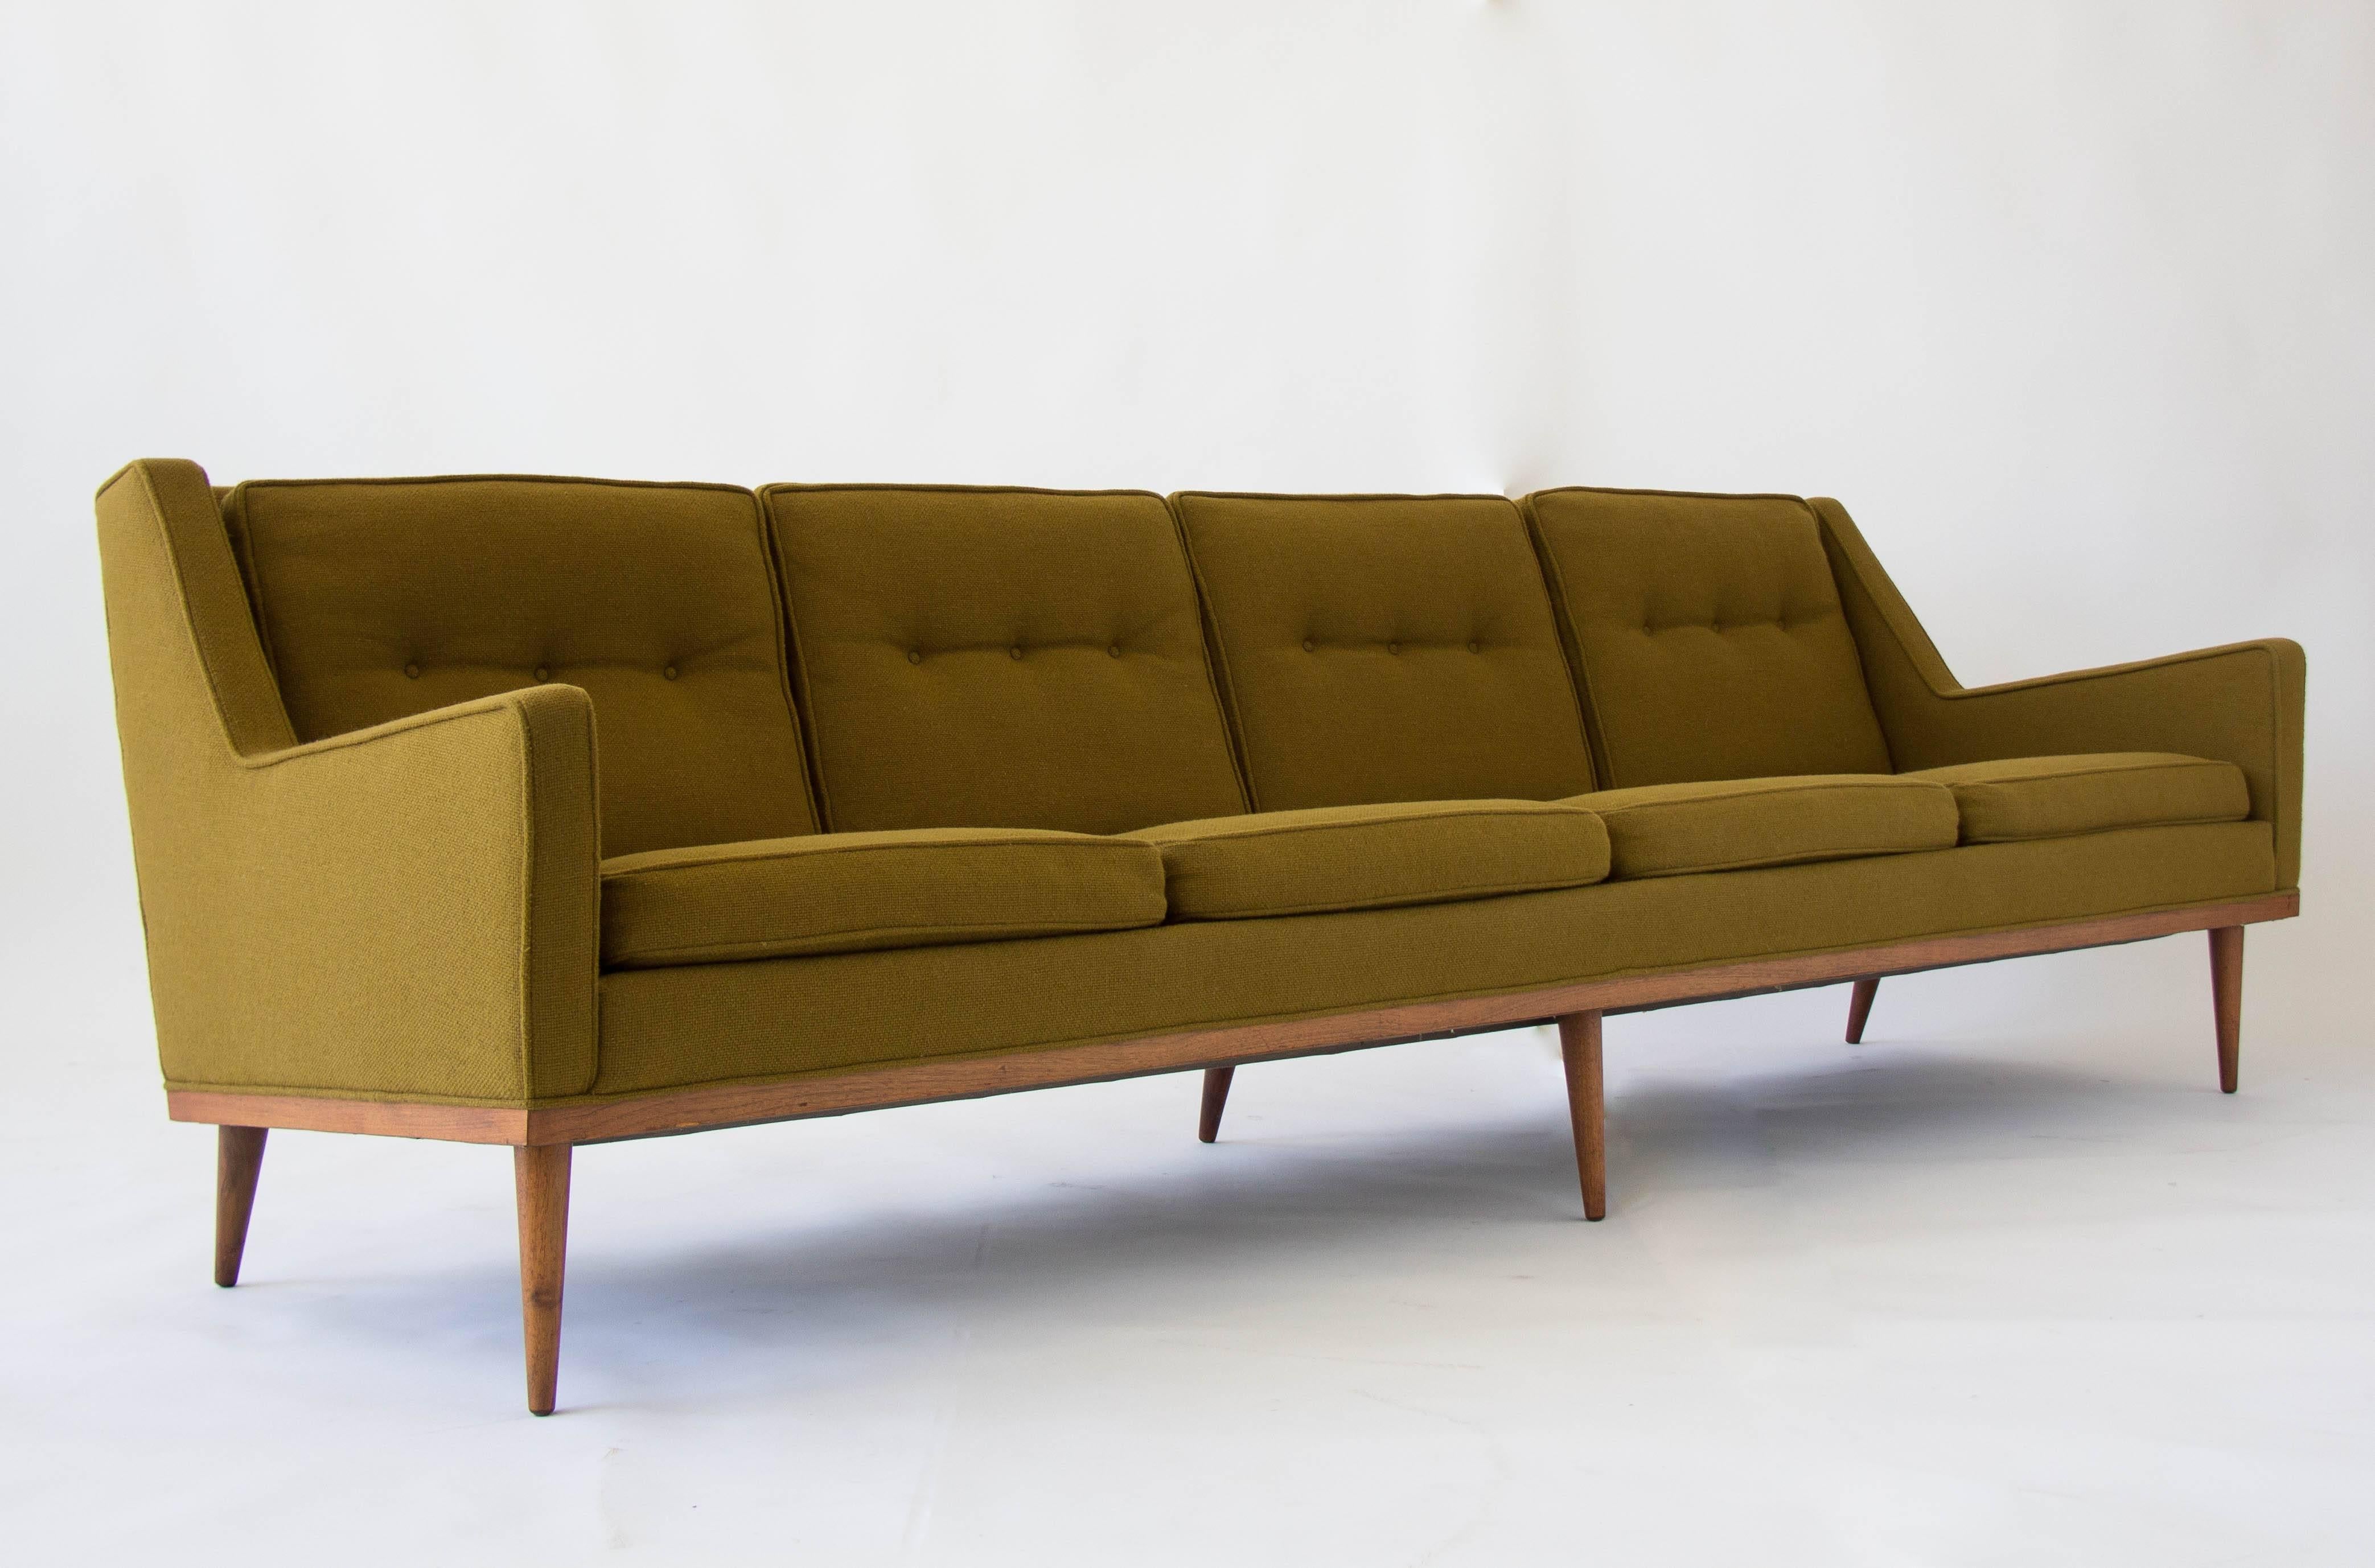 Milo Baughman designed the Articulate collection including this sofa for James, Inc. of North Carolina, Thayer Coggin's first manufacturing venture. It features an upholstered case with angled armrests atop a teak platform. The rear legs are kicked